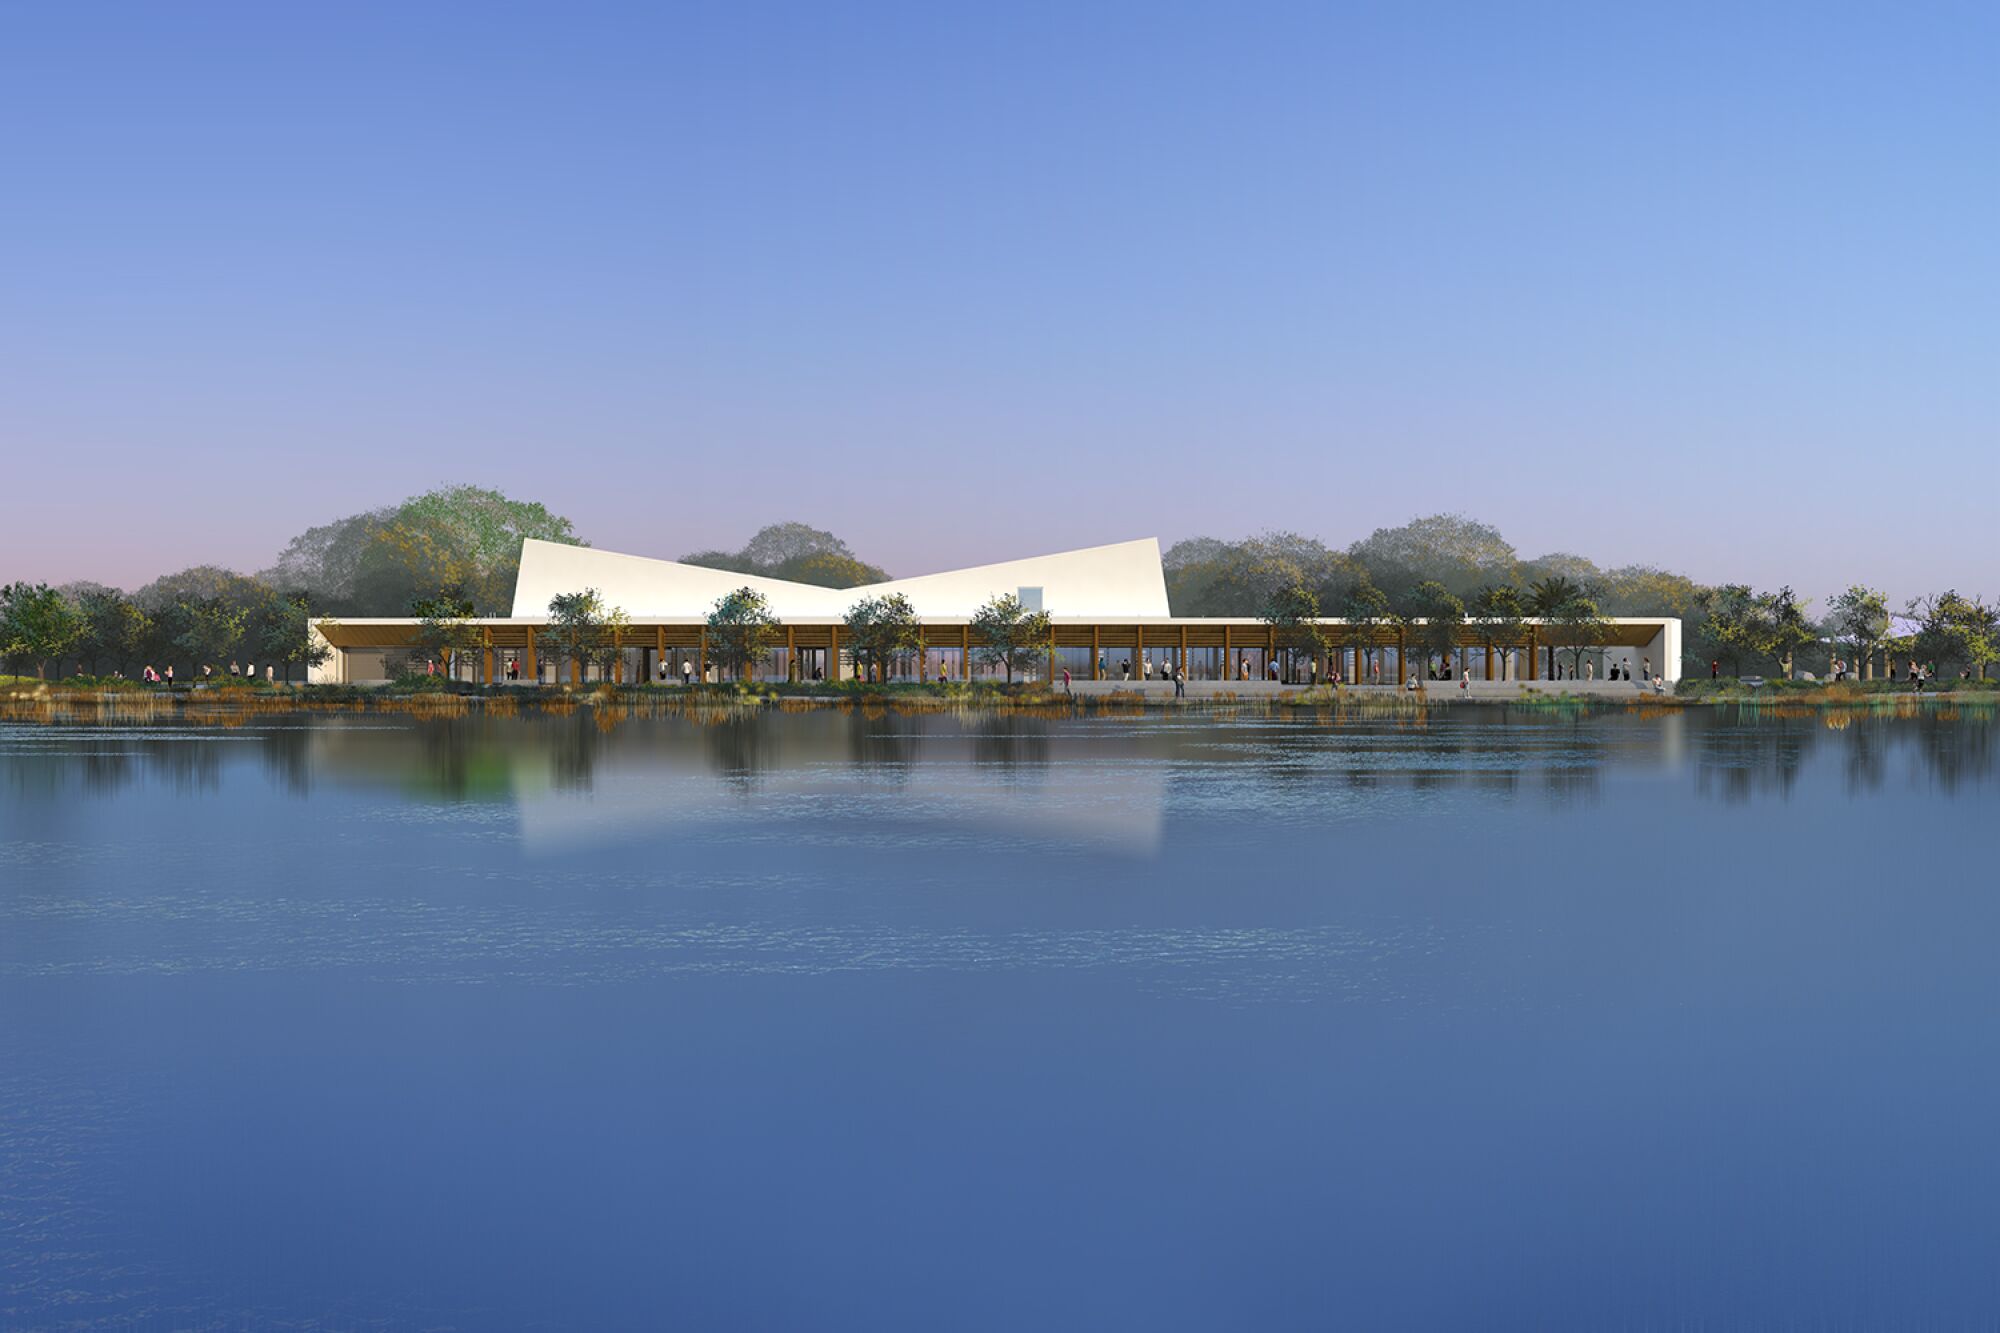 A rendering of the Earvin Magic Johnson Park and Event Center in Willowbrook by Paul Murdoch Architects. A challenge for architecture as cities reopen will be how to keep public spaces from becoming sites of transmission.